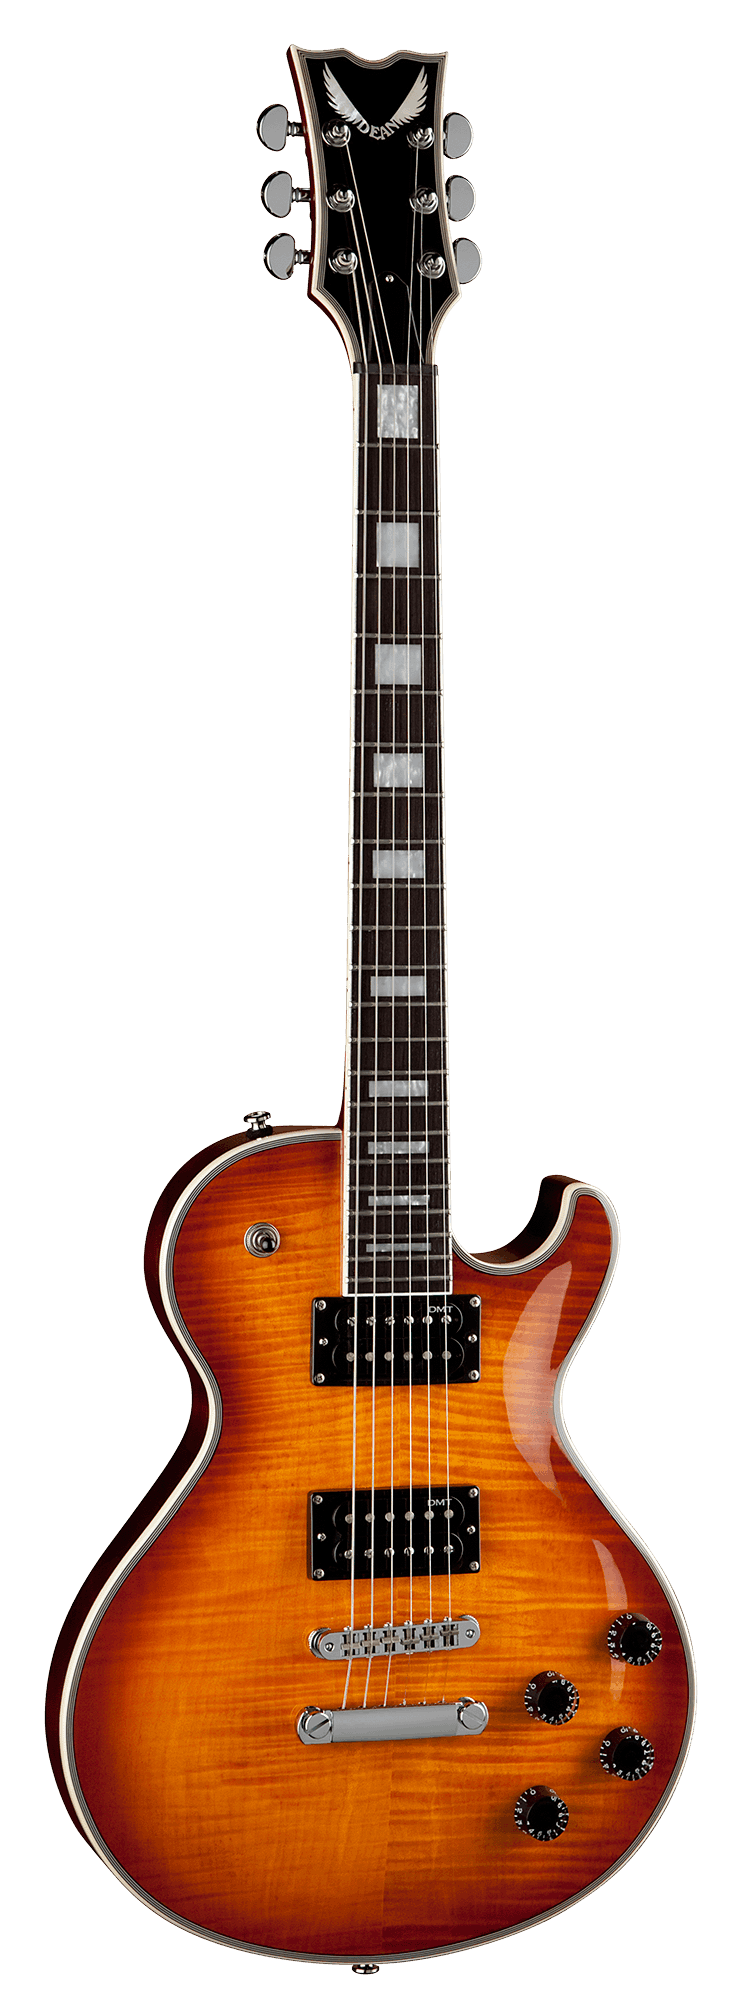 Dean Thoroughbred Deluxe - Trans Amber Exquisite Guitar